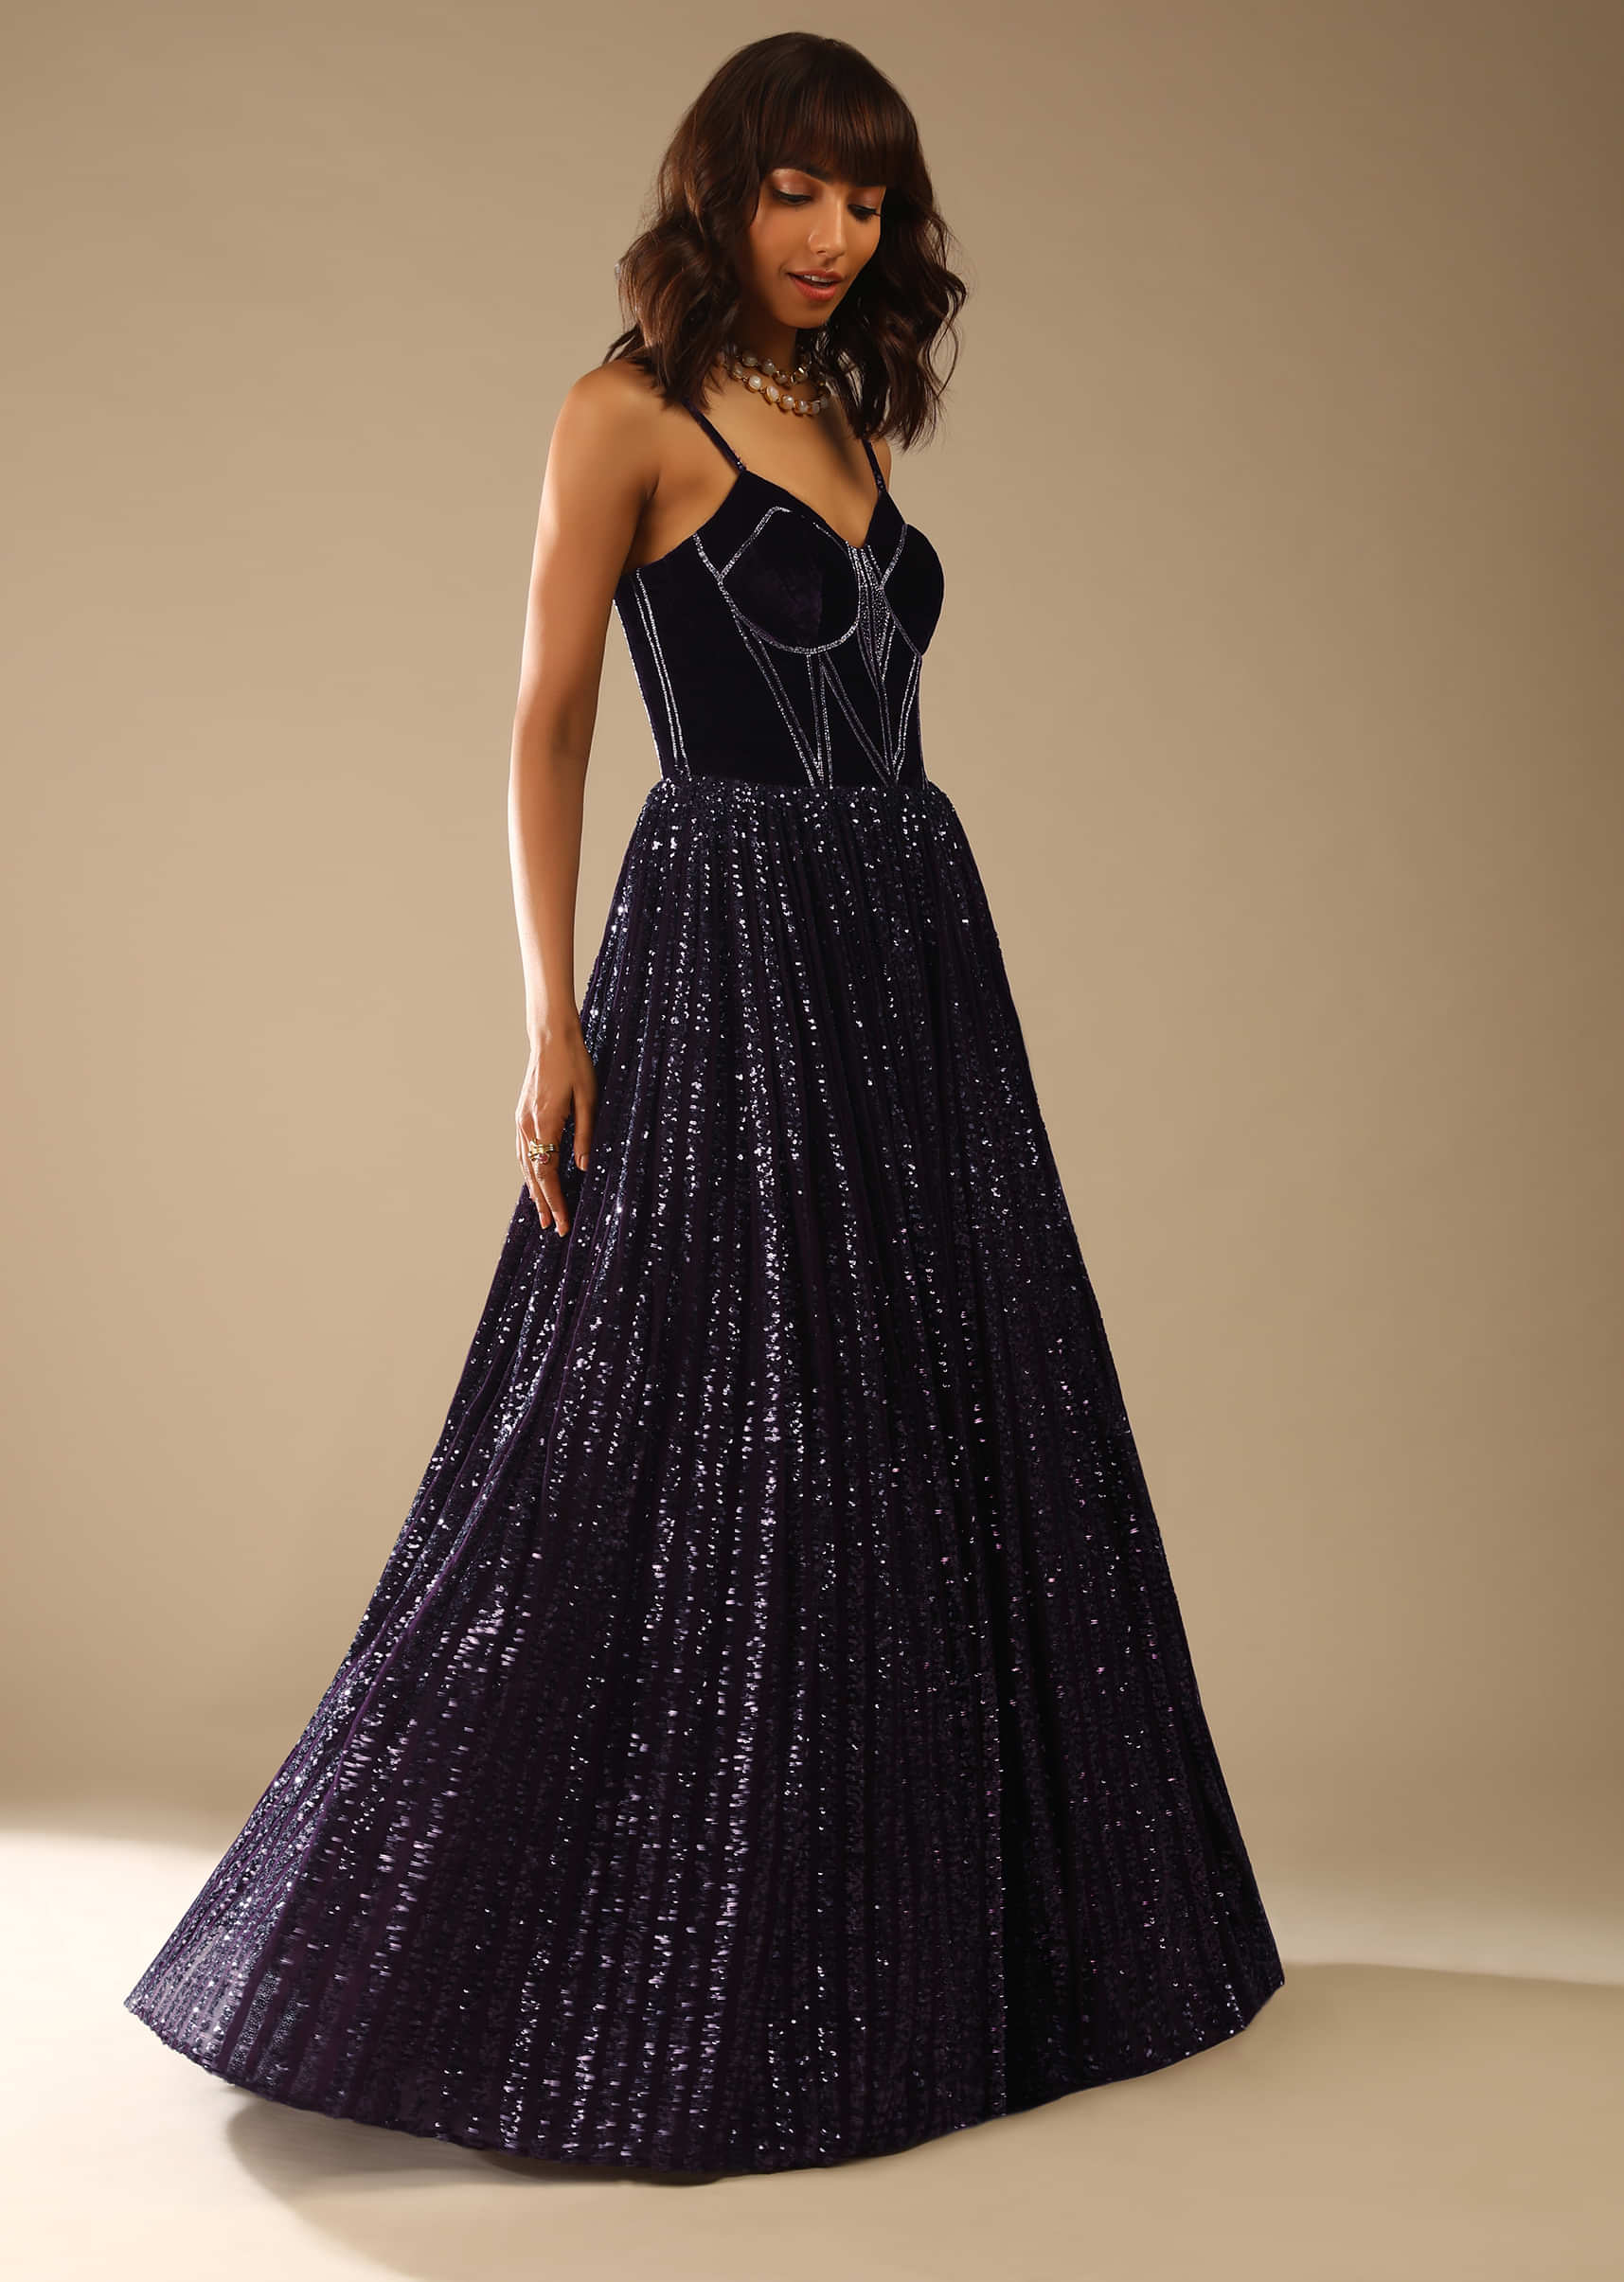 Wine Purple Corset Gown Embellished In Sequins With A Velvet Bodice Featuring Edgy Cut Dana Work